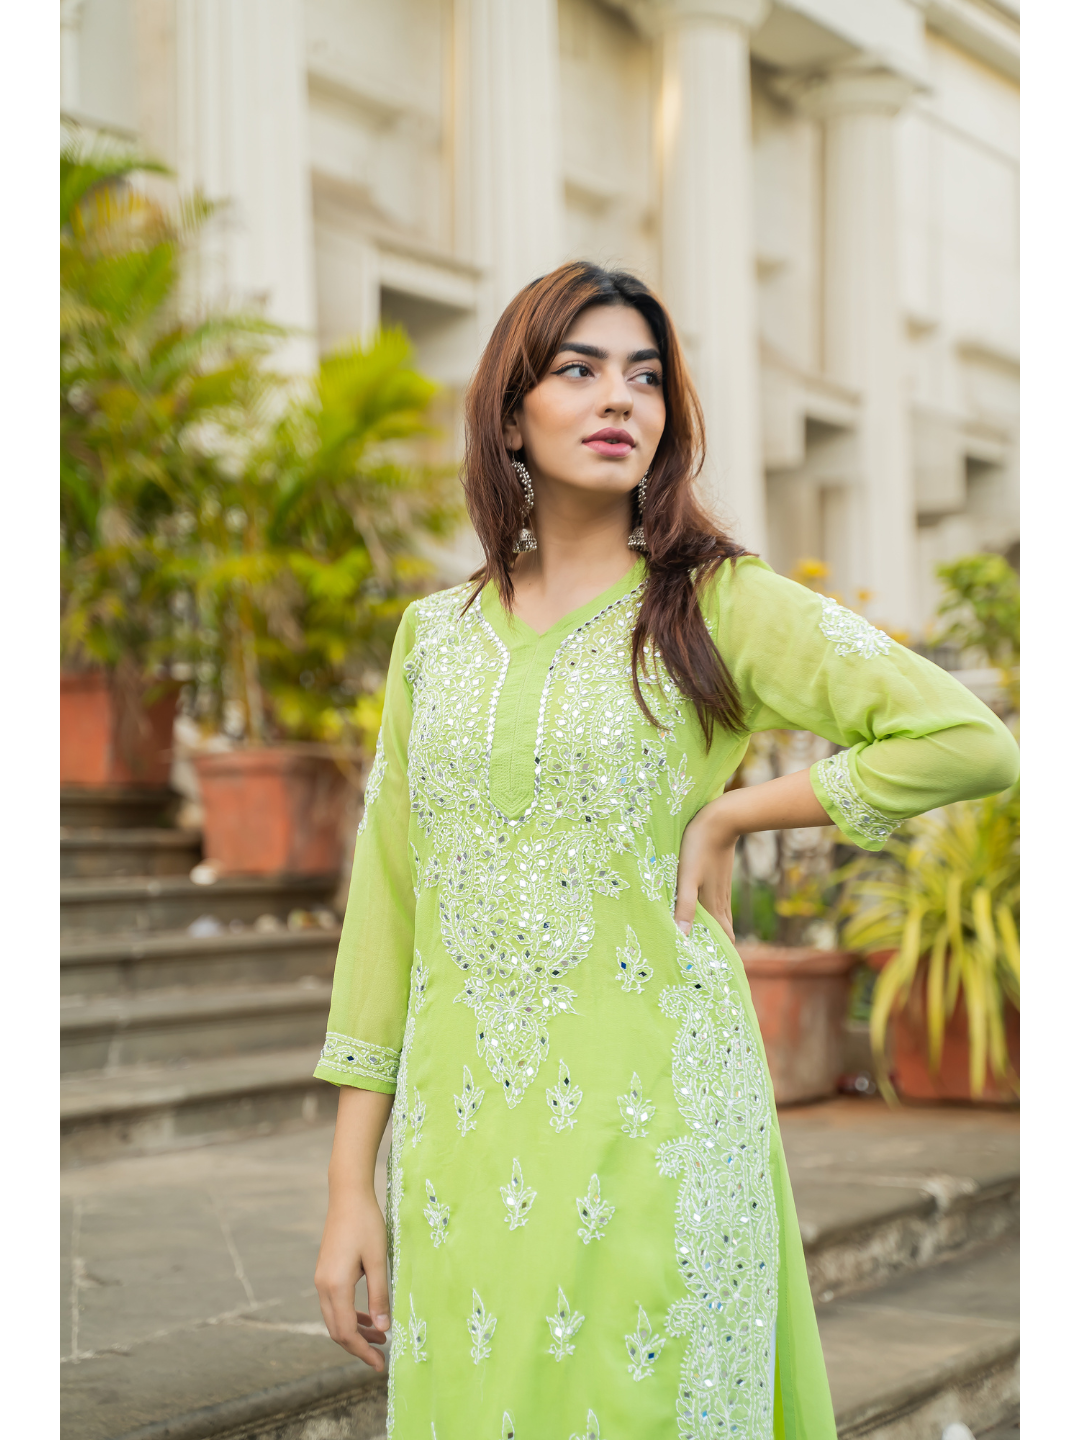 Parrot Green Cotton Kurtis Online Shopping for Women at Low Prices